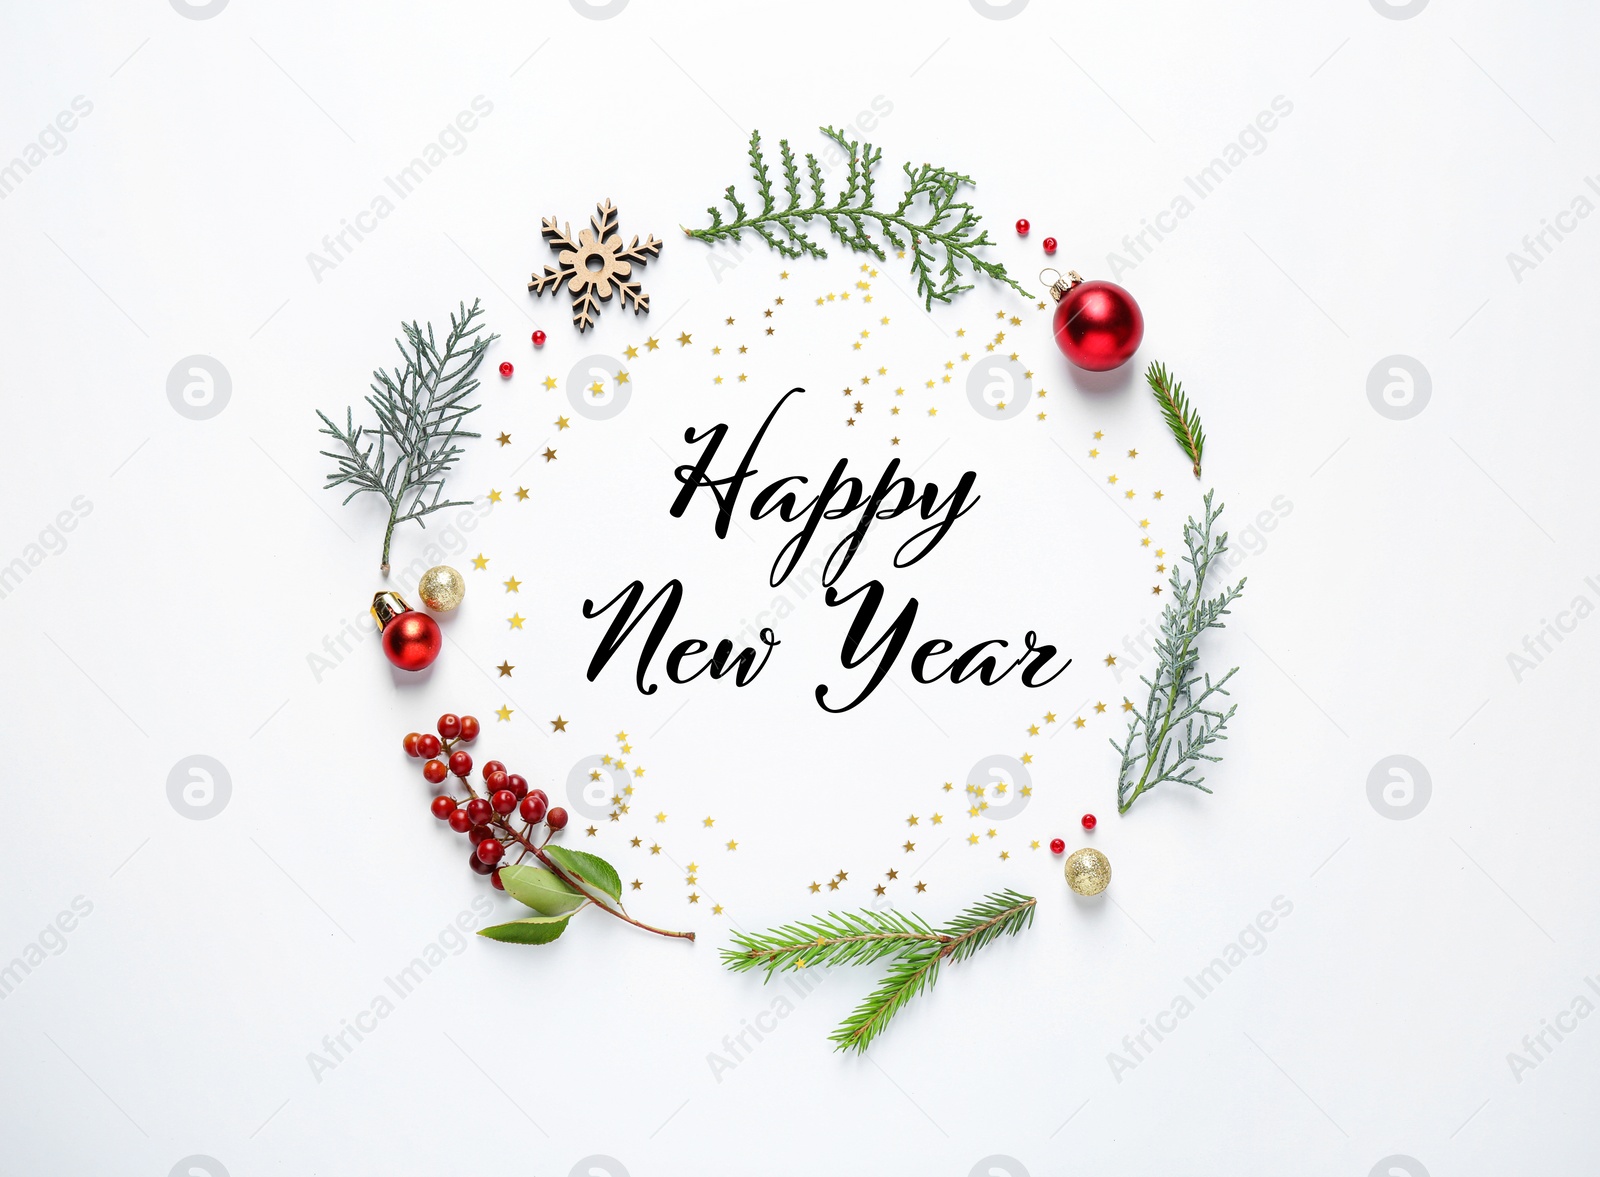 Image of Happy New Year! Flat lay composition with fit tree branches and festive decor on white background 